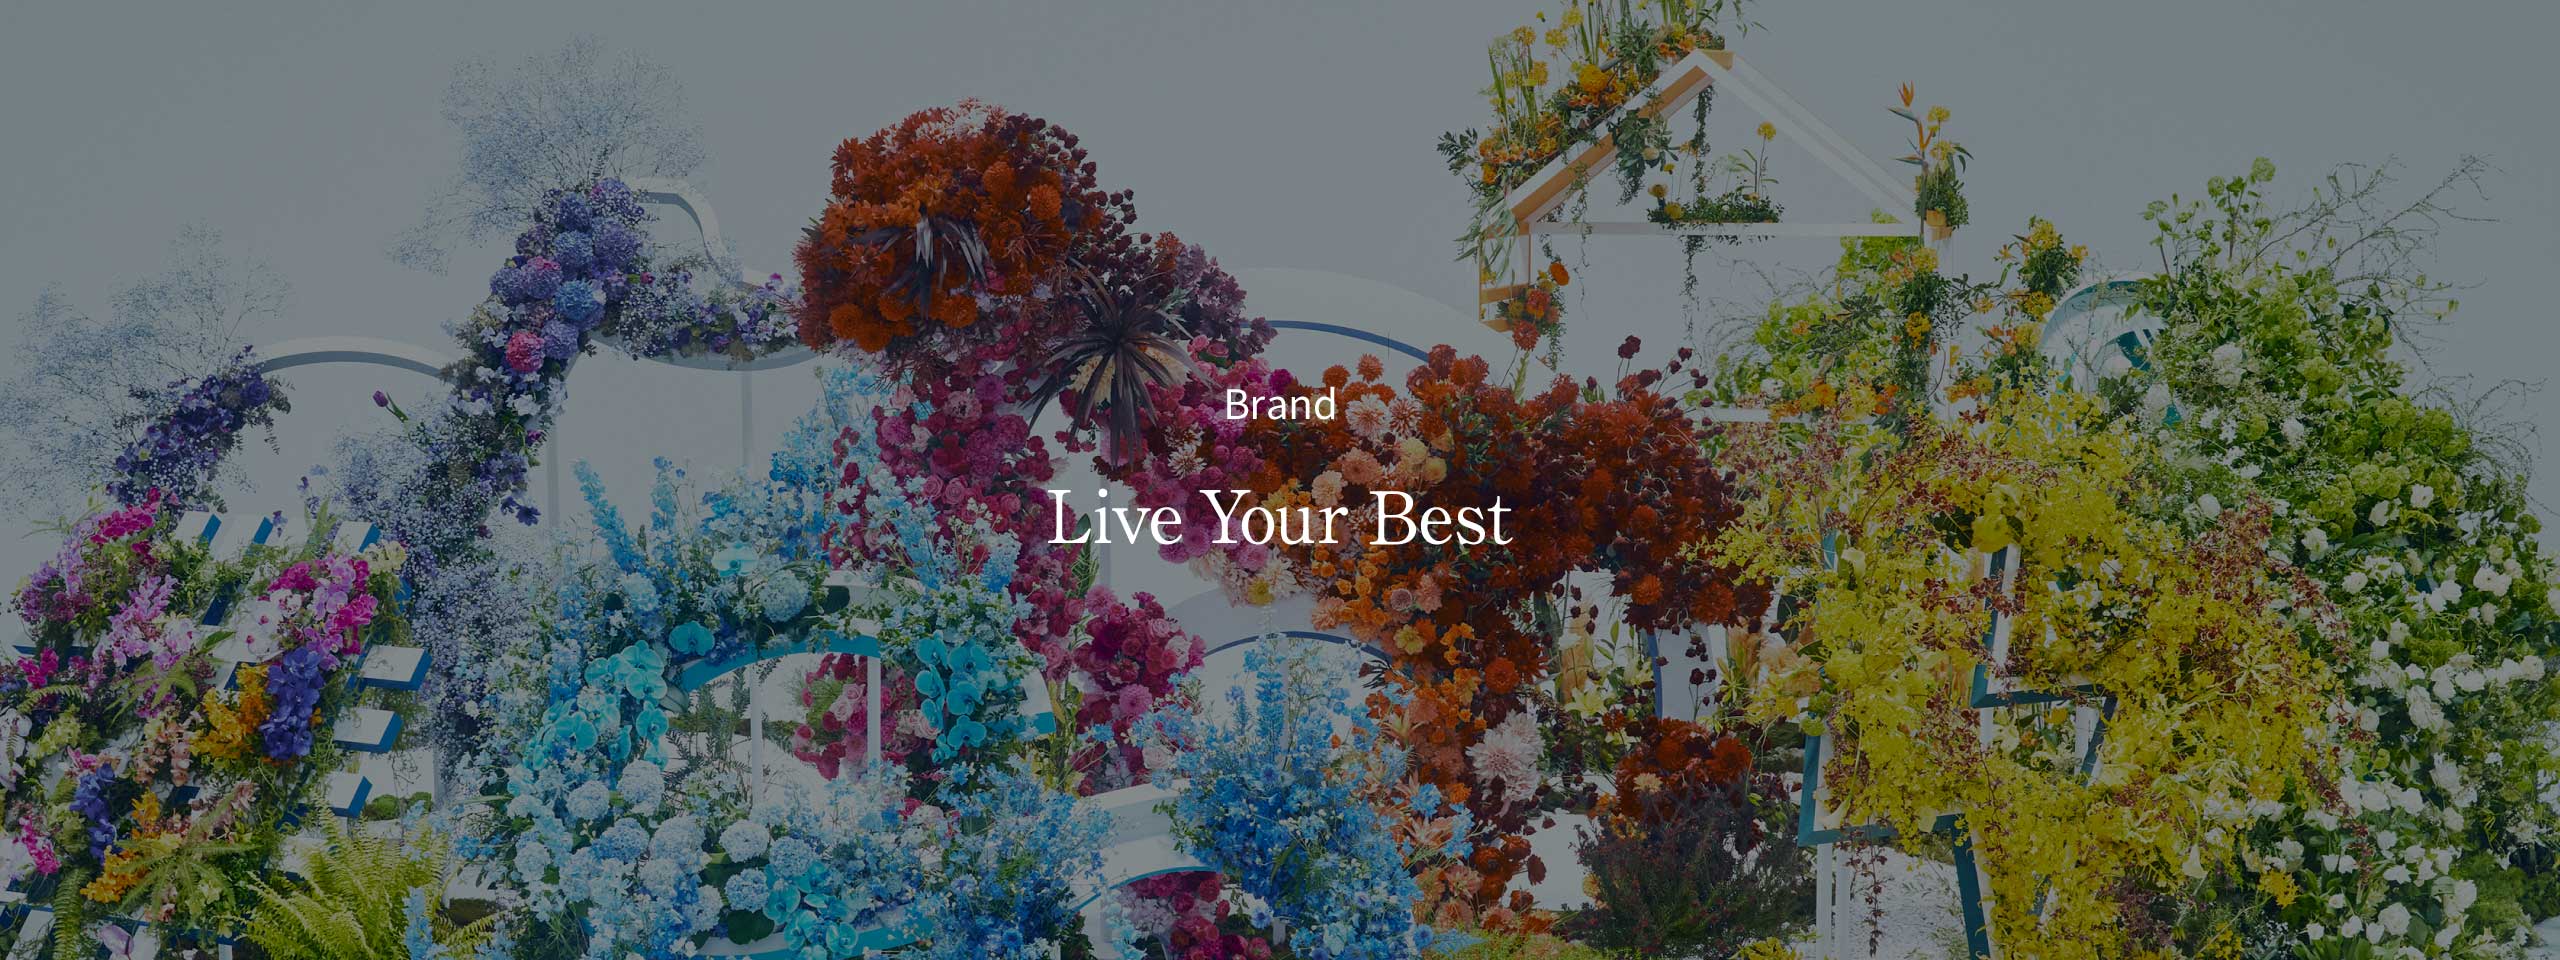 Brand：Live Your Best